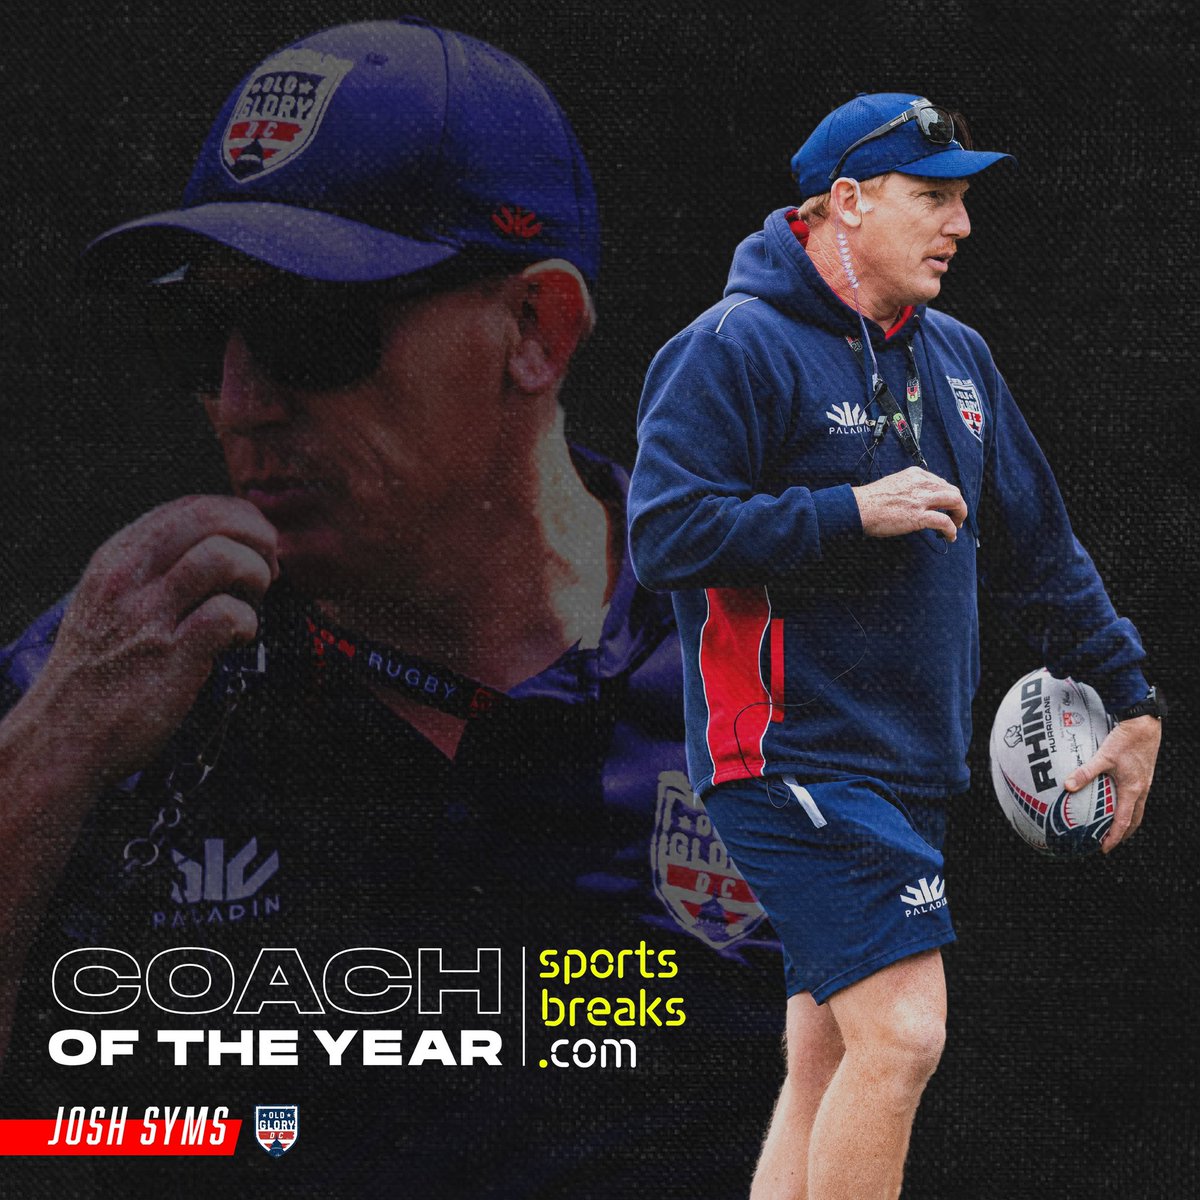 Congratulations to the @sportsbreakscom Coach of the Year, @syms_joshua, who undoubtedly left his mark on @OldGloryDC and the League. Syms led the team to a Championship Series debut and through a thrilling upset over the 2022 MLR Champions in the Eastern Conference Eliminator.…